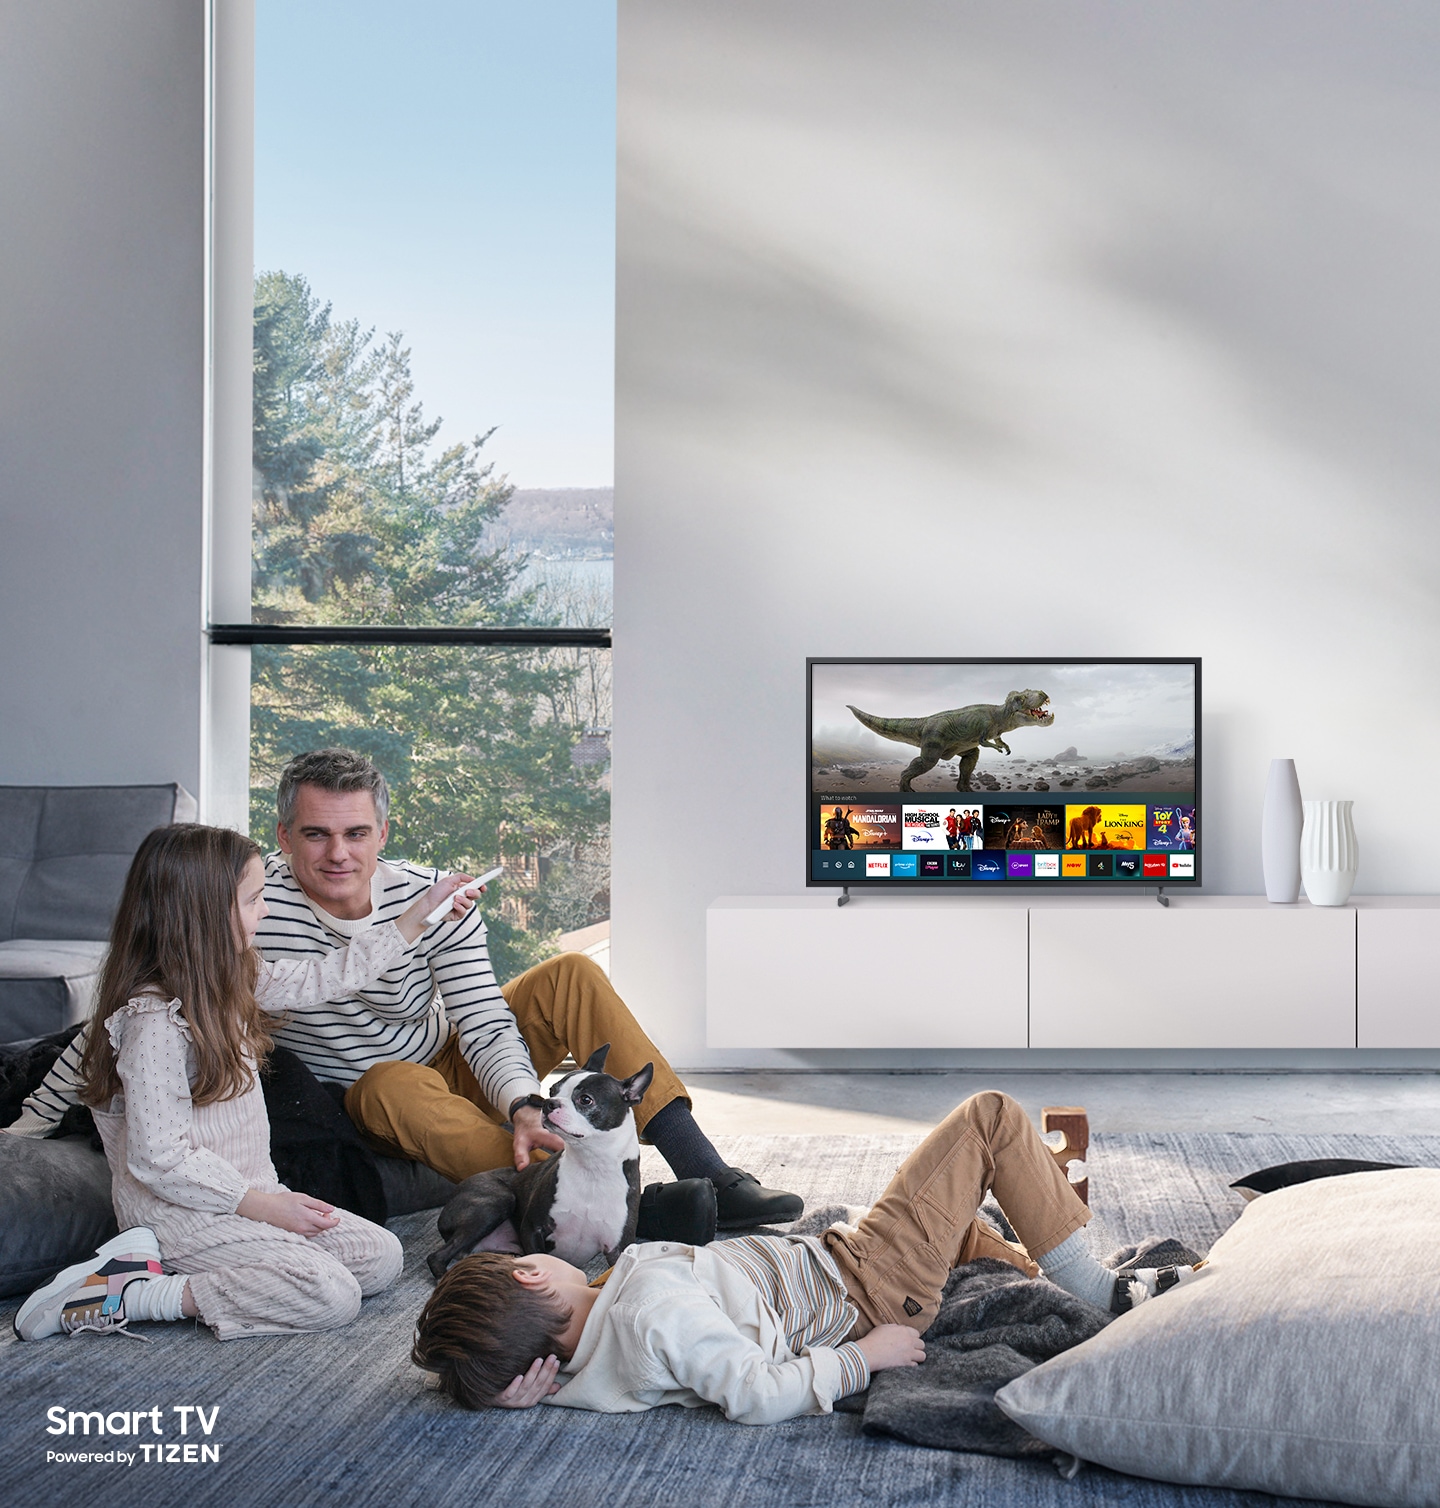 Discover just how smart a TV can be